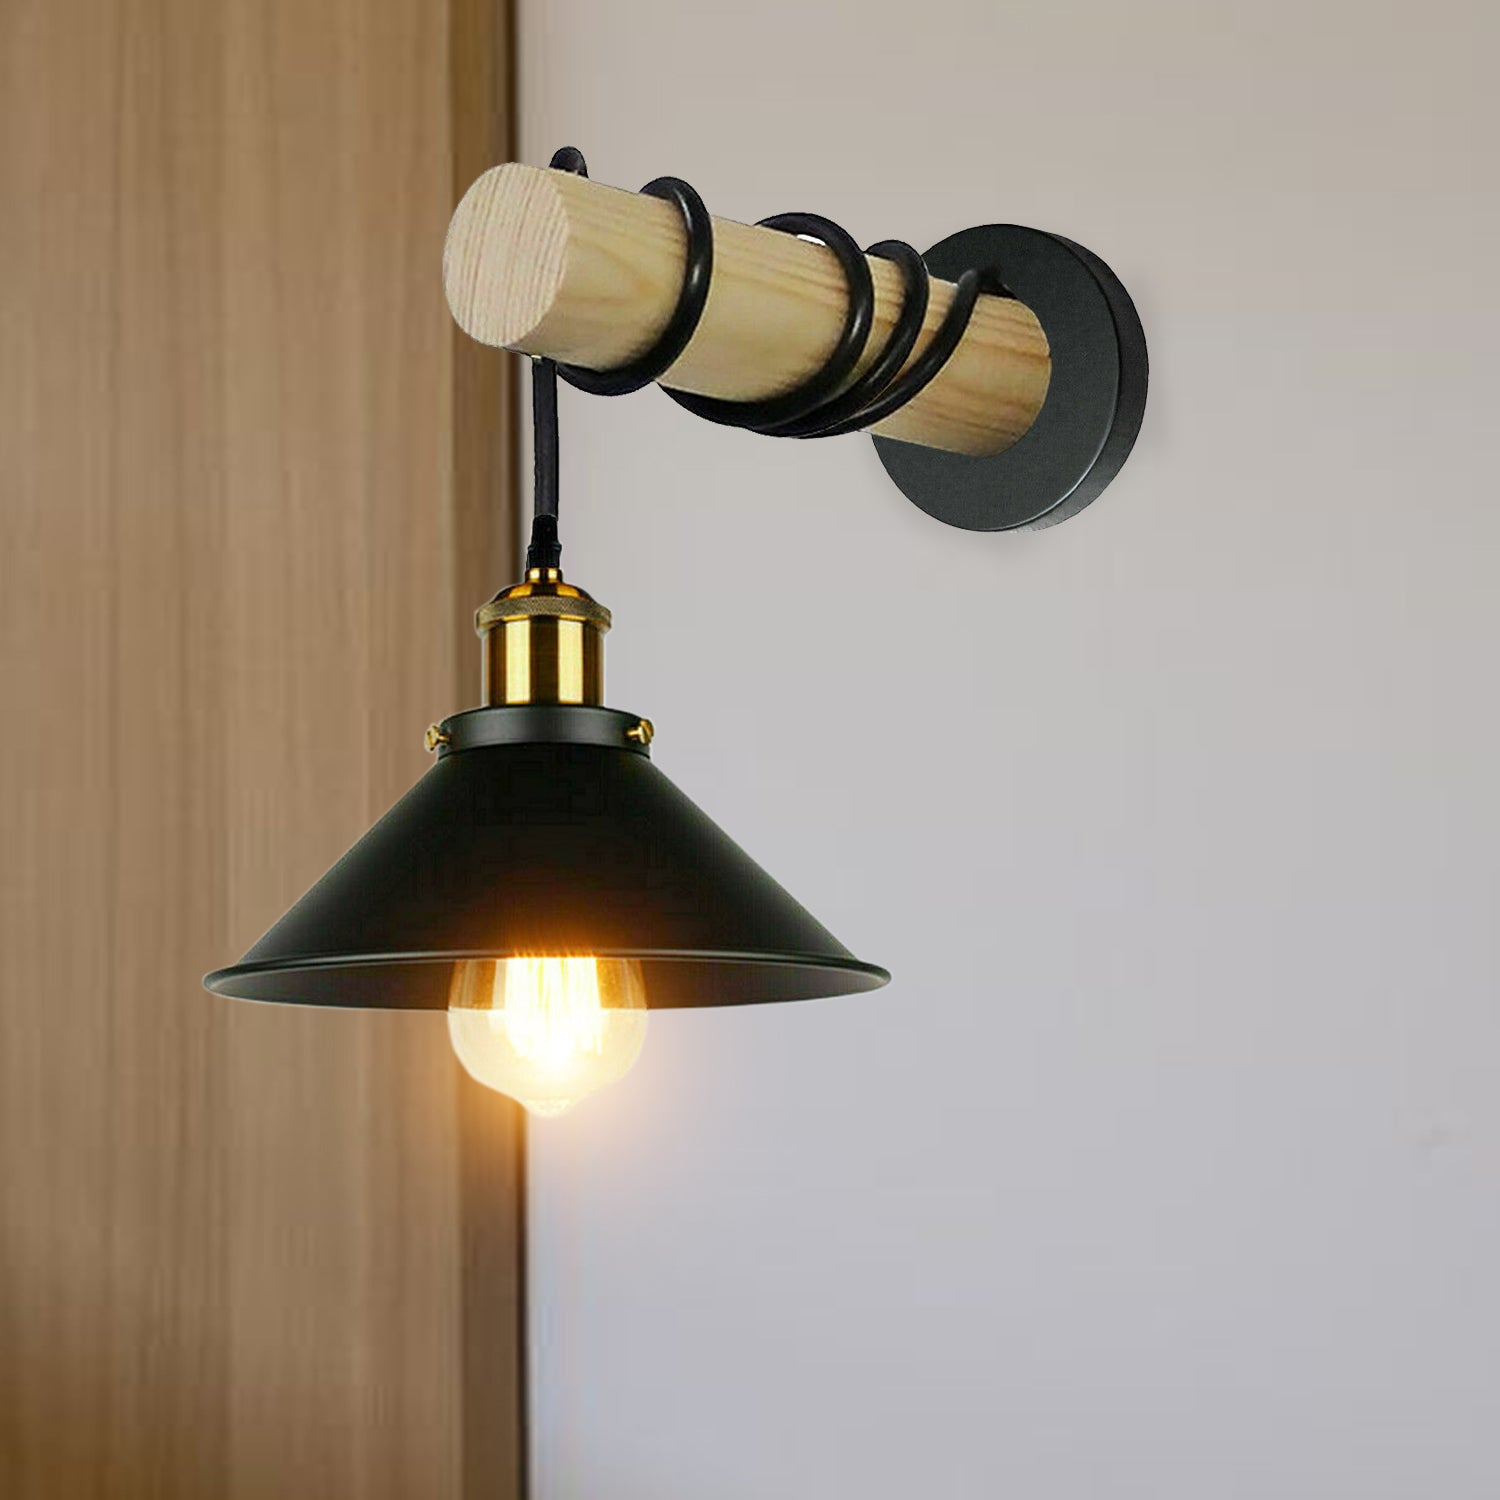 Modern Combined Solid Wooden Arm Chandelier Lighting With Black Cone Shaped Metal Shade wall sconce~3471 - LEDSone UK Ltd